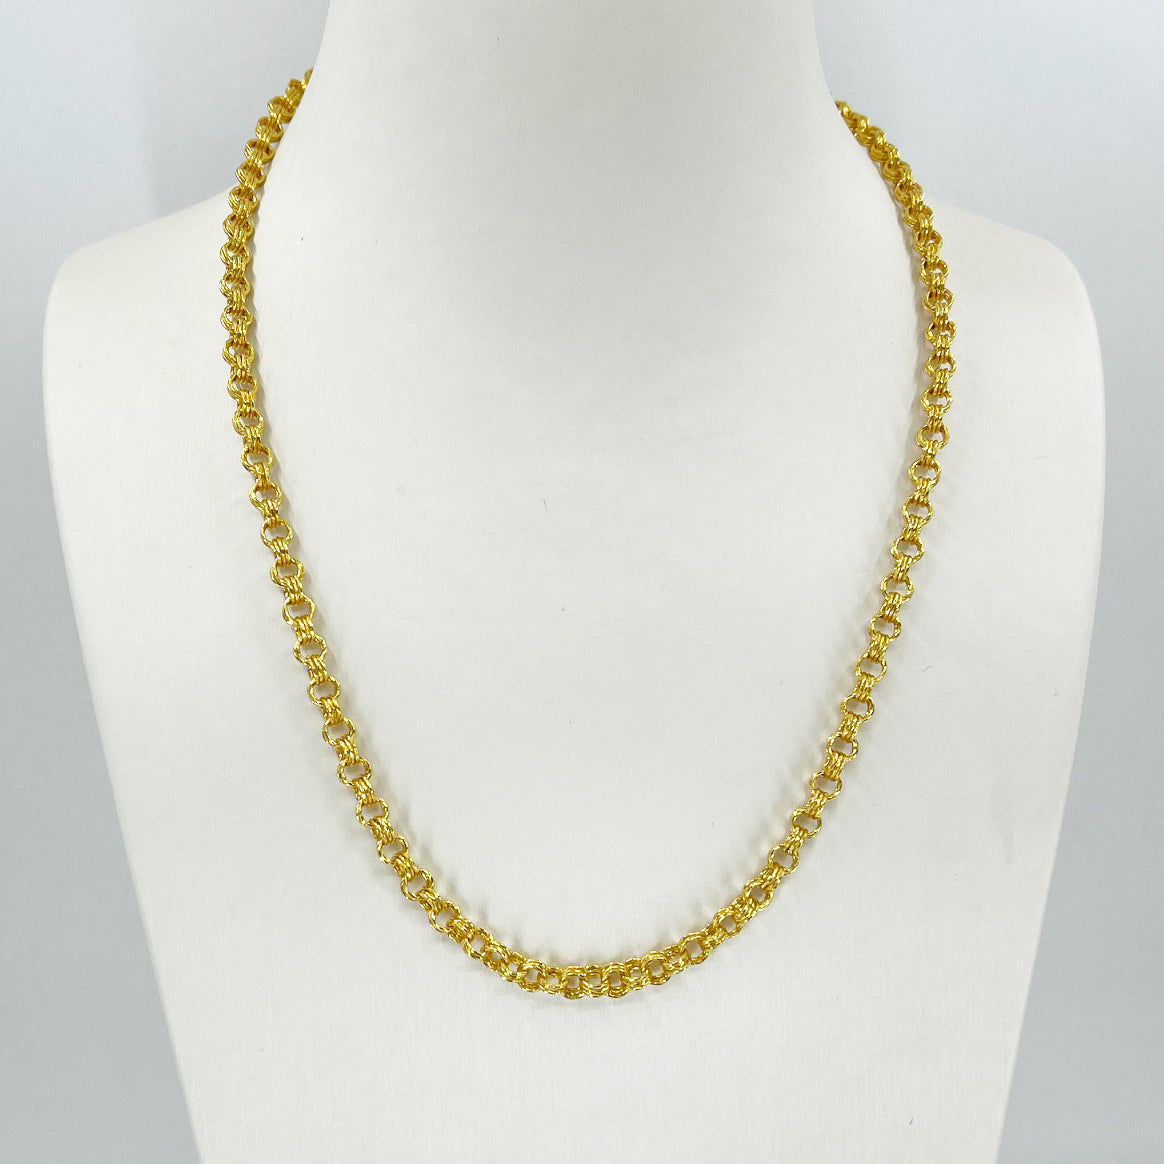 24K Solid Yellow Gold Cable Link Chain 31.1 Grams 18"